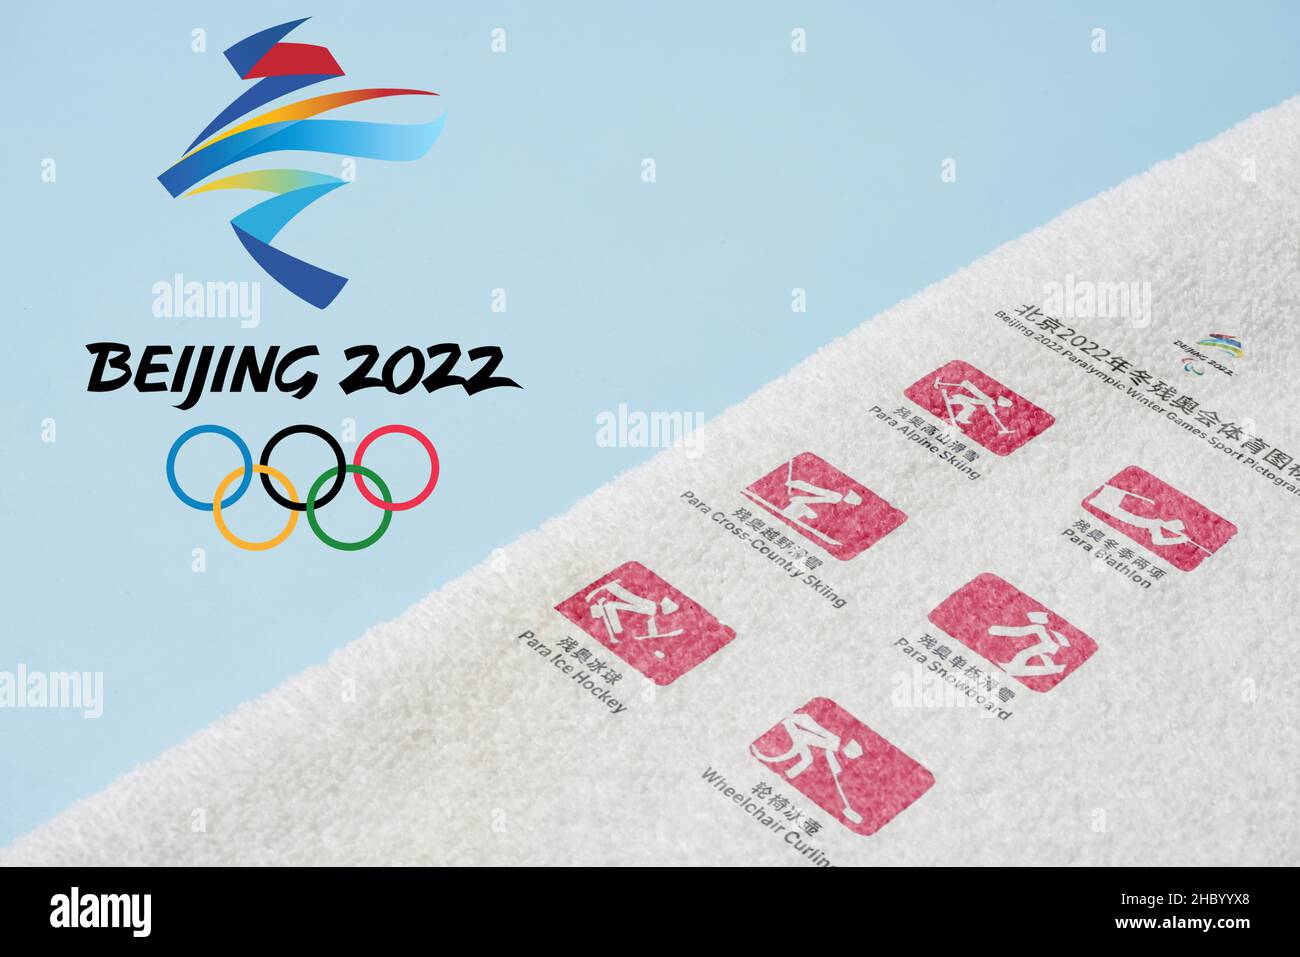 14 December 2021 - Los Angeles, USA: Winter Paralympic games 2022 in Beijing. 2022 Winter Paralympics symbol on white towel with copy space. Beijing Stock Photo